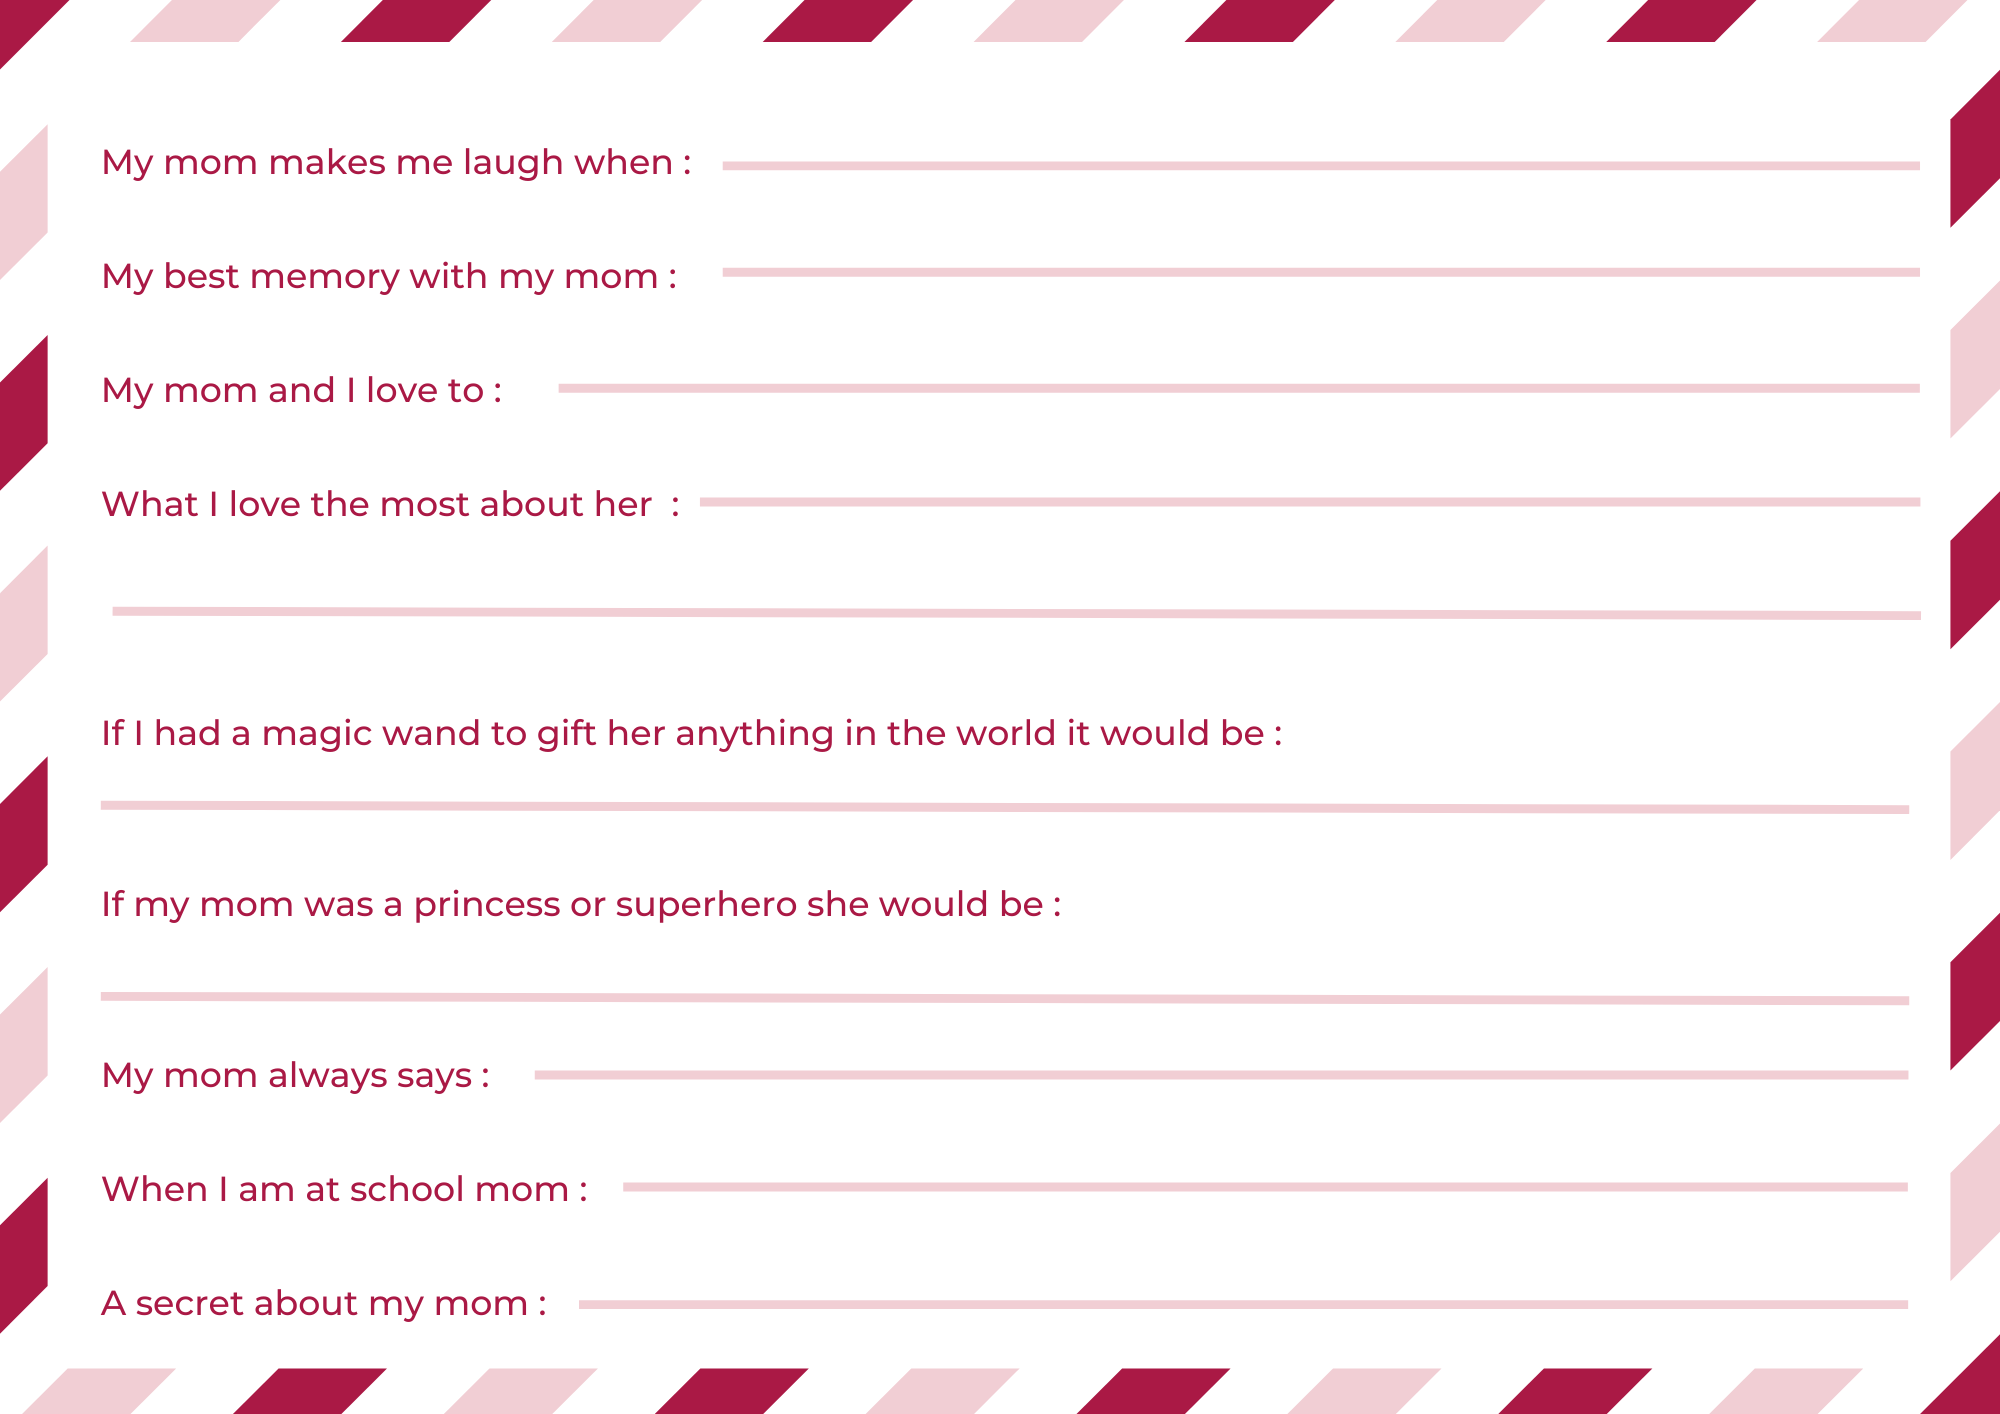 Free downloadable printable Mother's Day questionnaire fun template to fill in and draw for your children